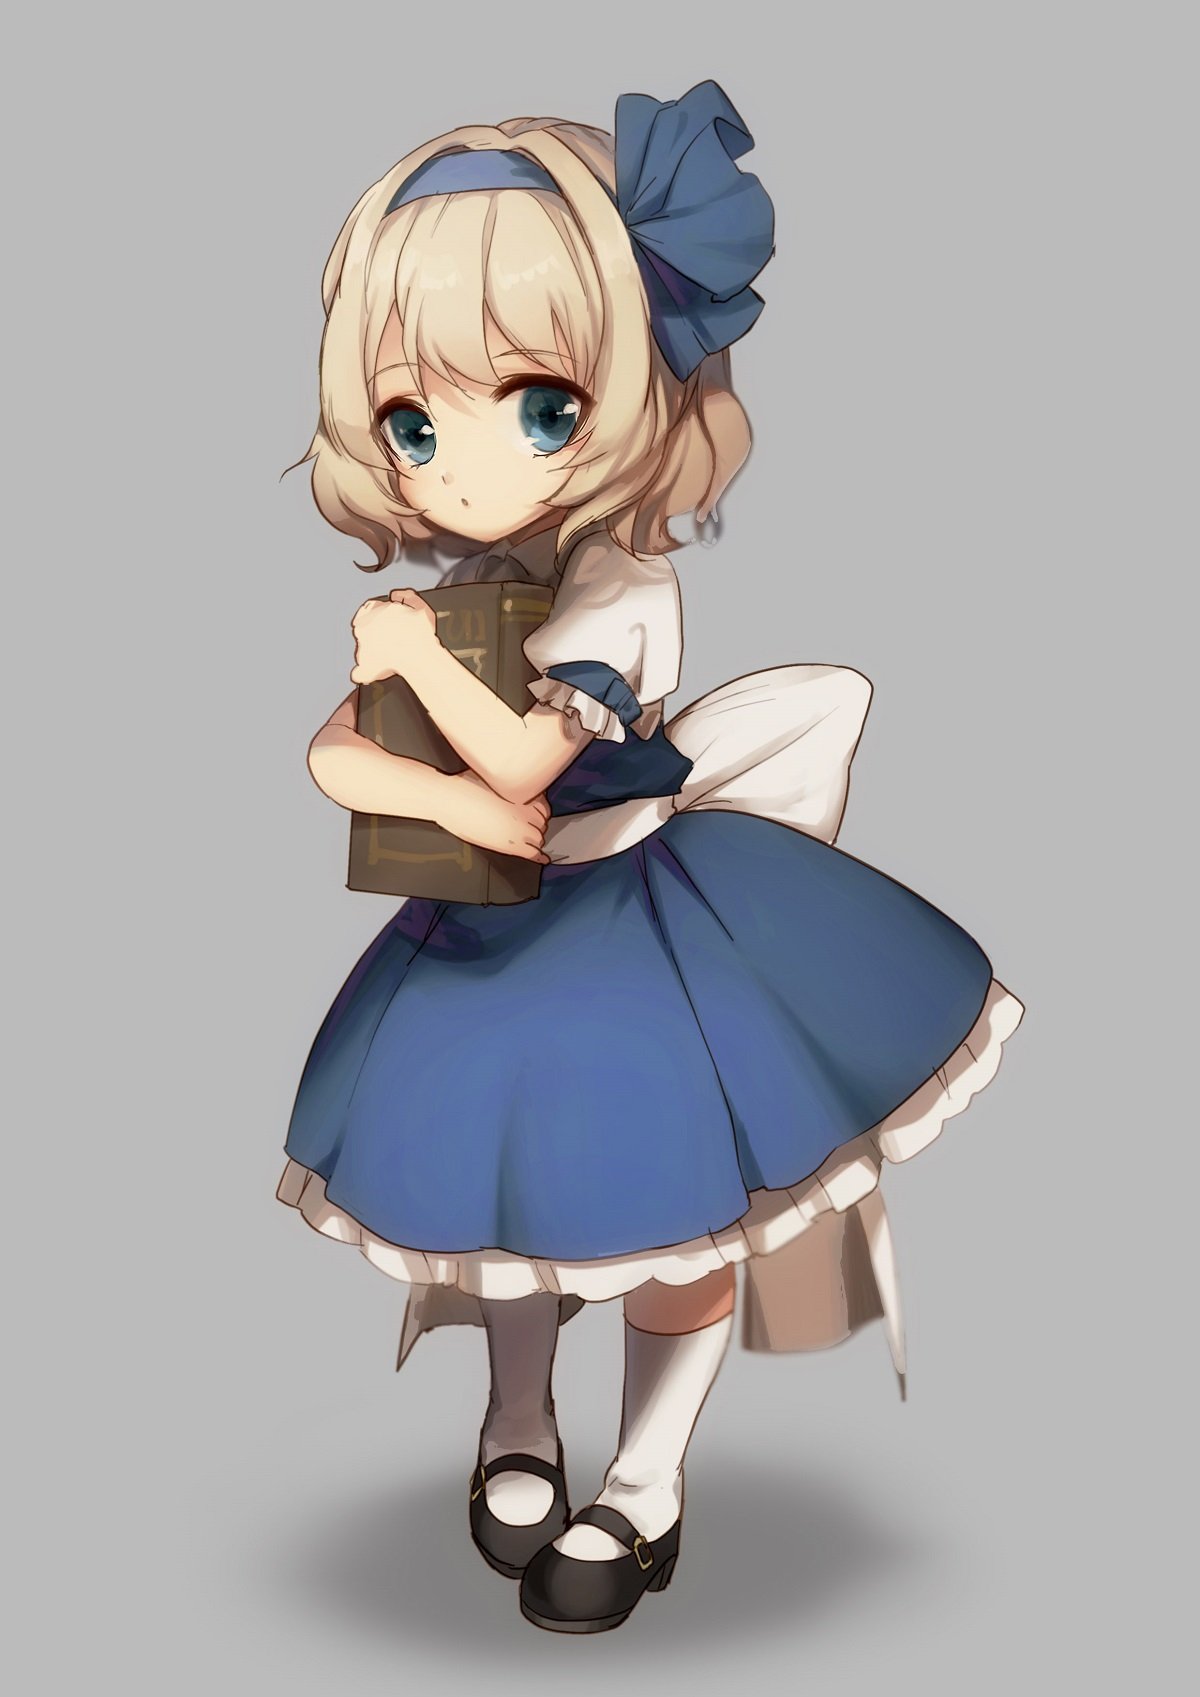 1girl alice_margatroid alice_margatroid_(pc-98) blonde_hair blue_dress blue_eyes book child dress full_body grey_background hairband highres kneehighs looking_at_viewer mary_janes no-kan puffy_sleeves ribbon sash shoes short_hair short_sleeves simple_background solo touhou touhou_(pc-98) white_legwear younger